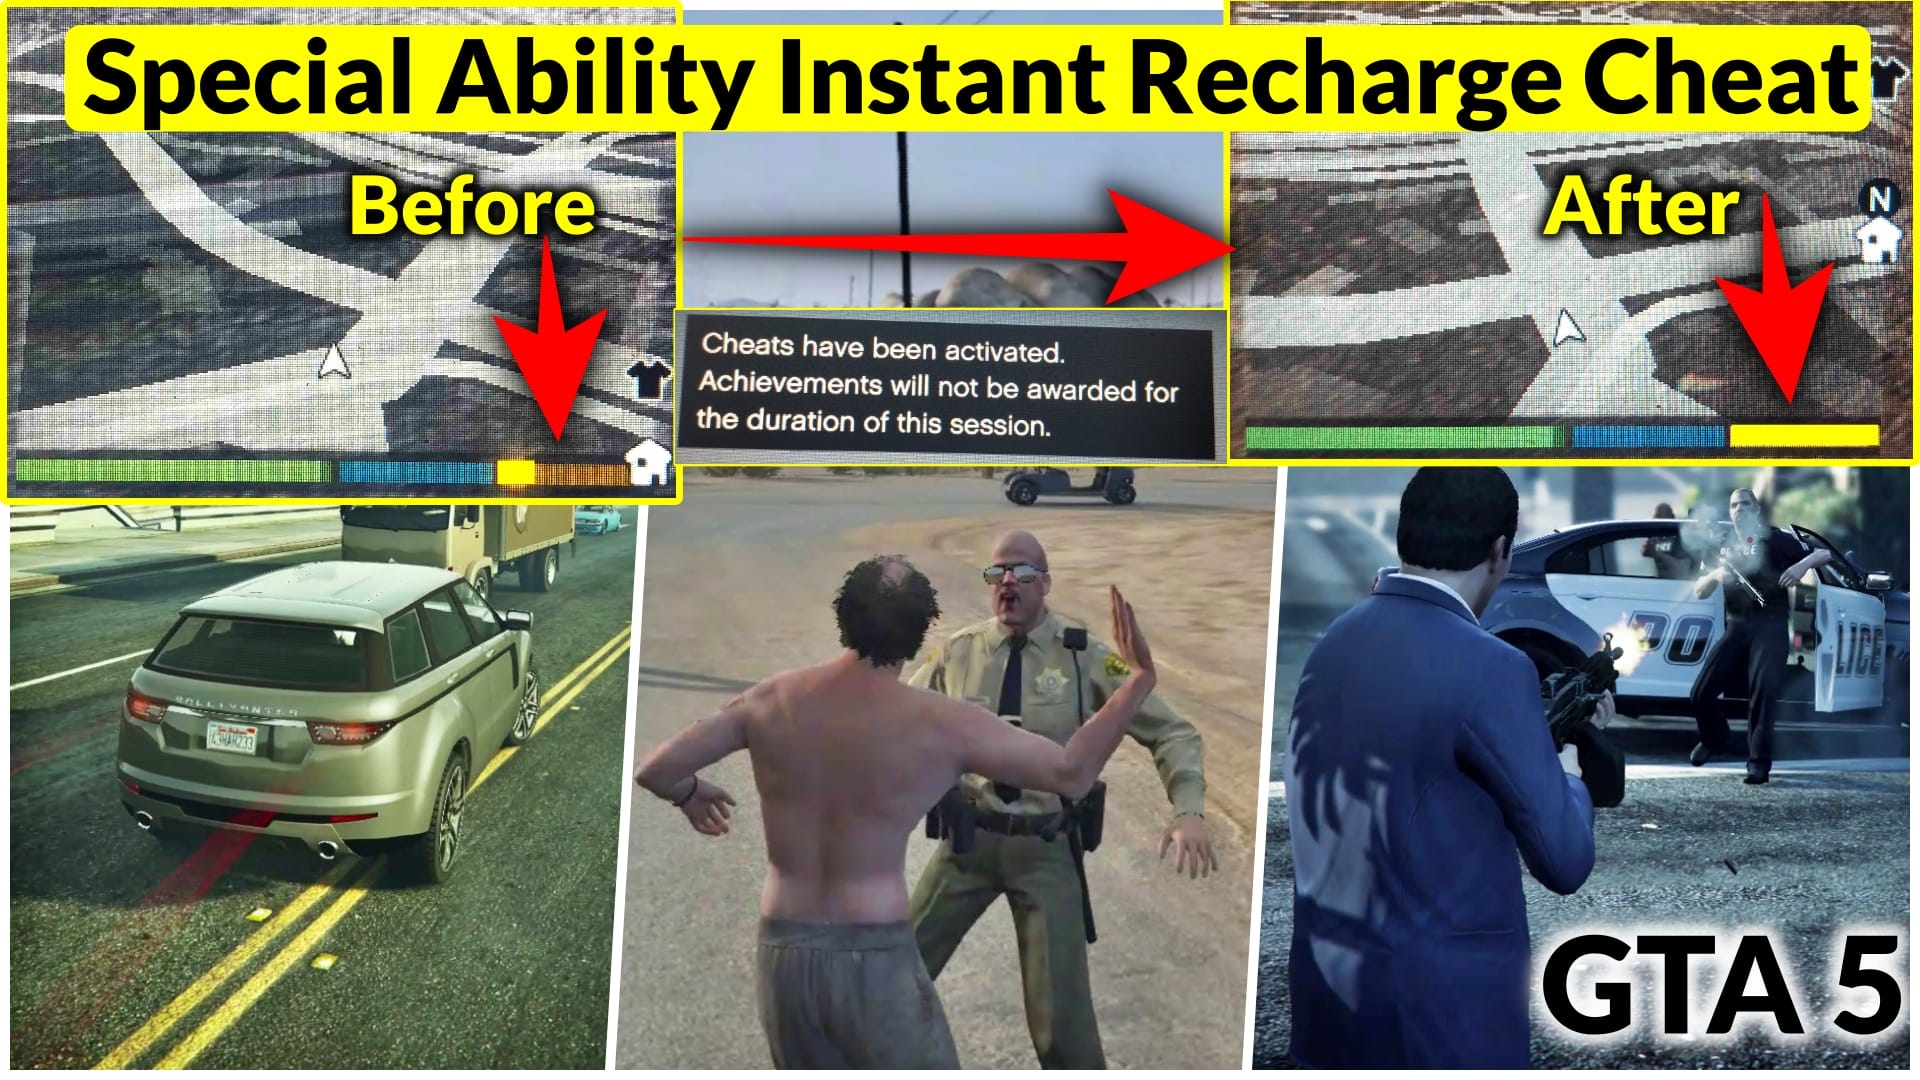 Special ability Instant Recharge cheat in GTA 5